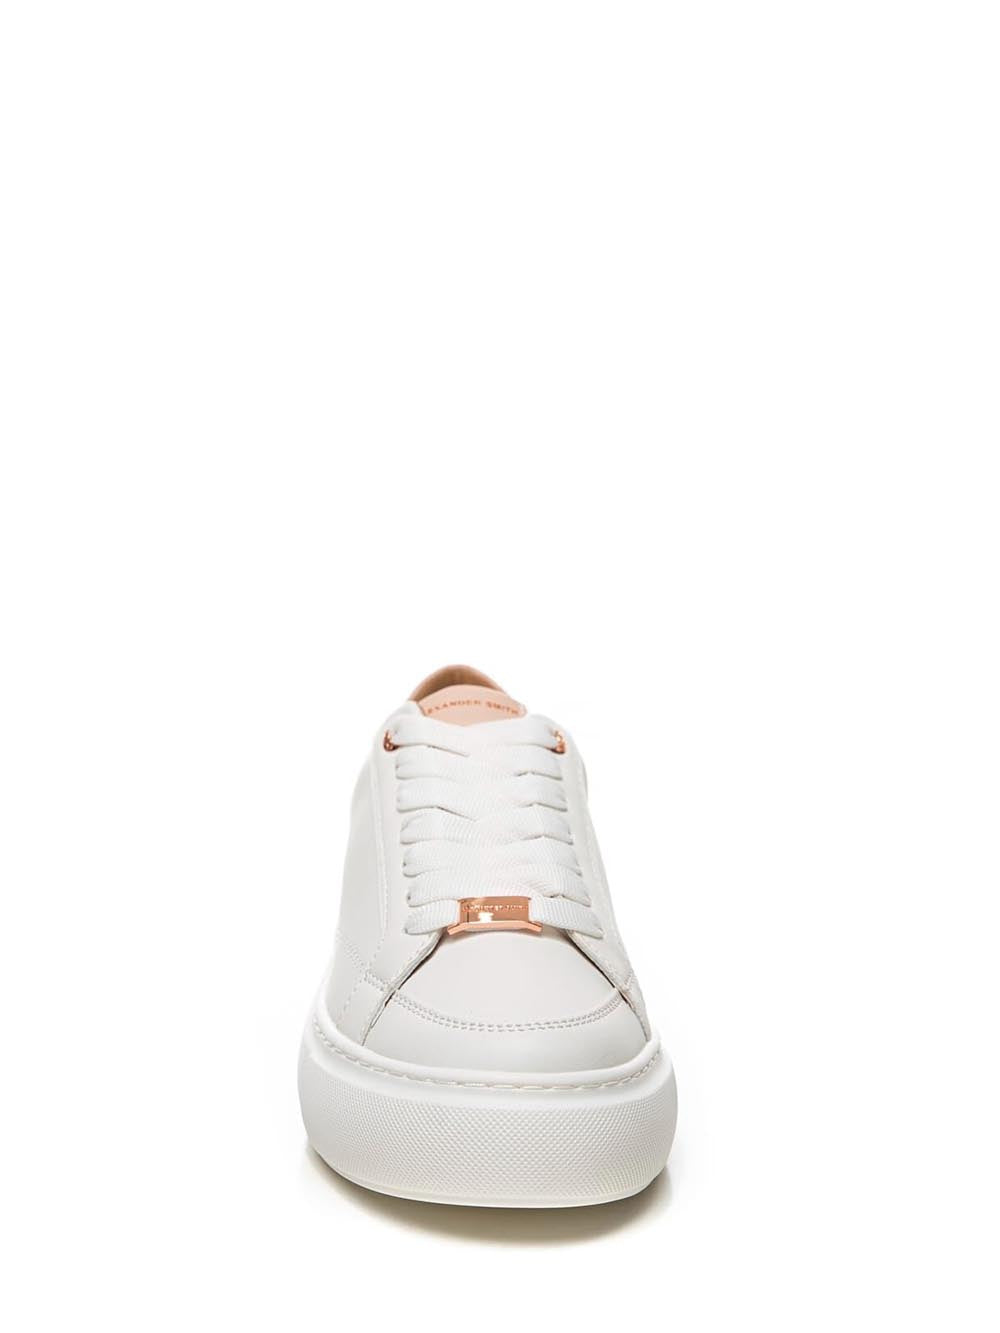 Alexander Smith Sneakers Donna Eco Greenwich Woman AeazegW-7649-Wpc Bianco/rosa